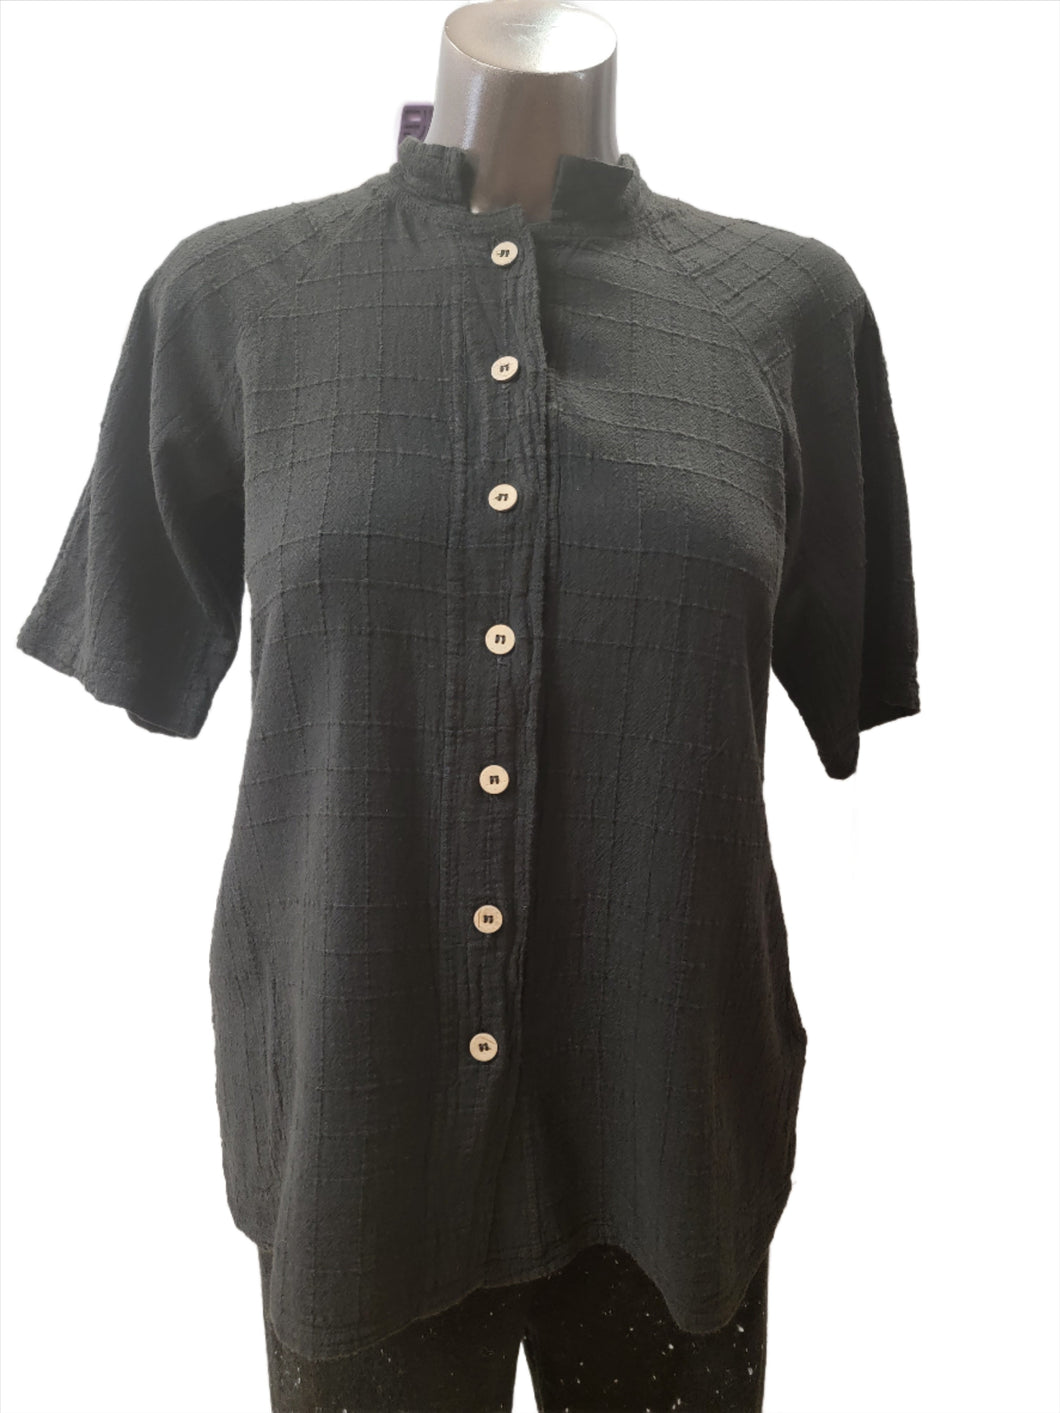 Button Up Eden Shirt by Ezzewear (available in plus sizes)